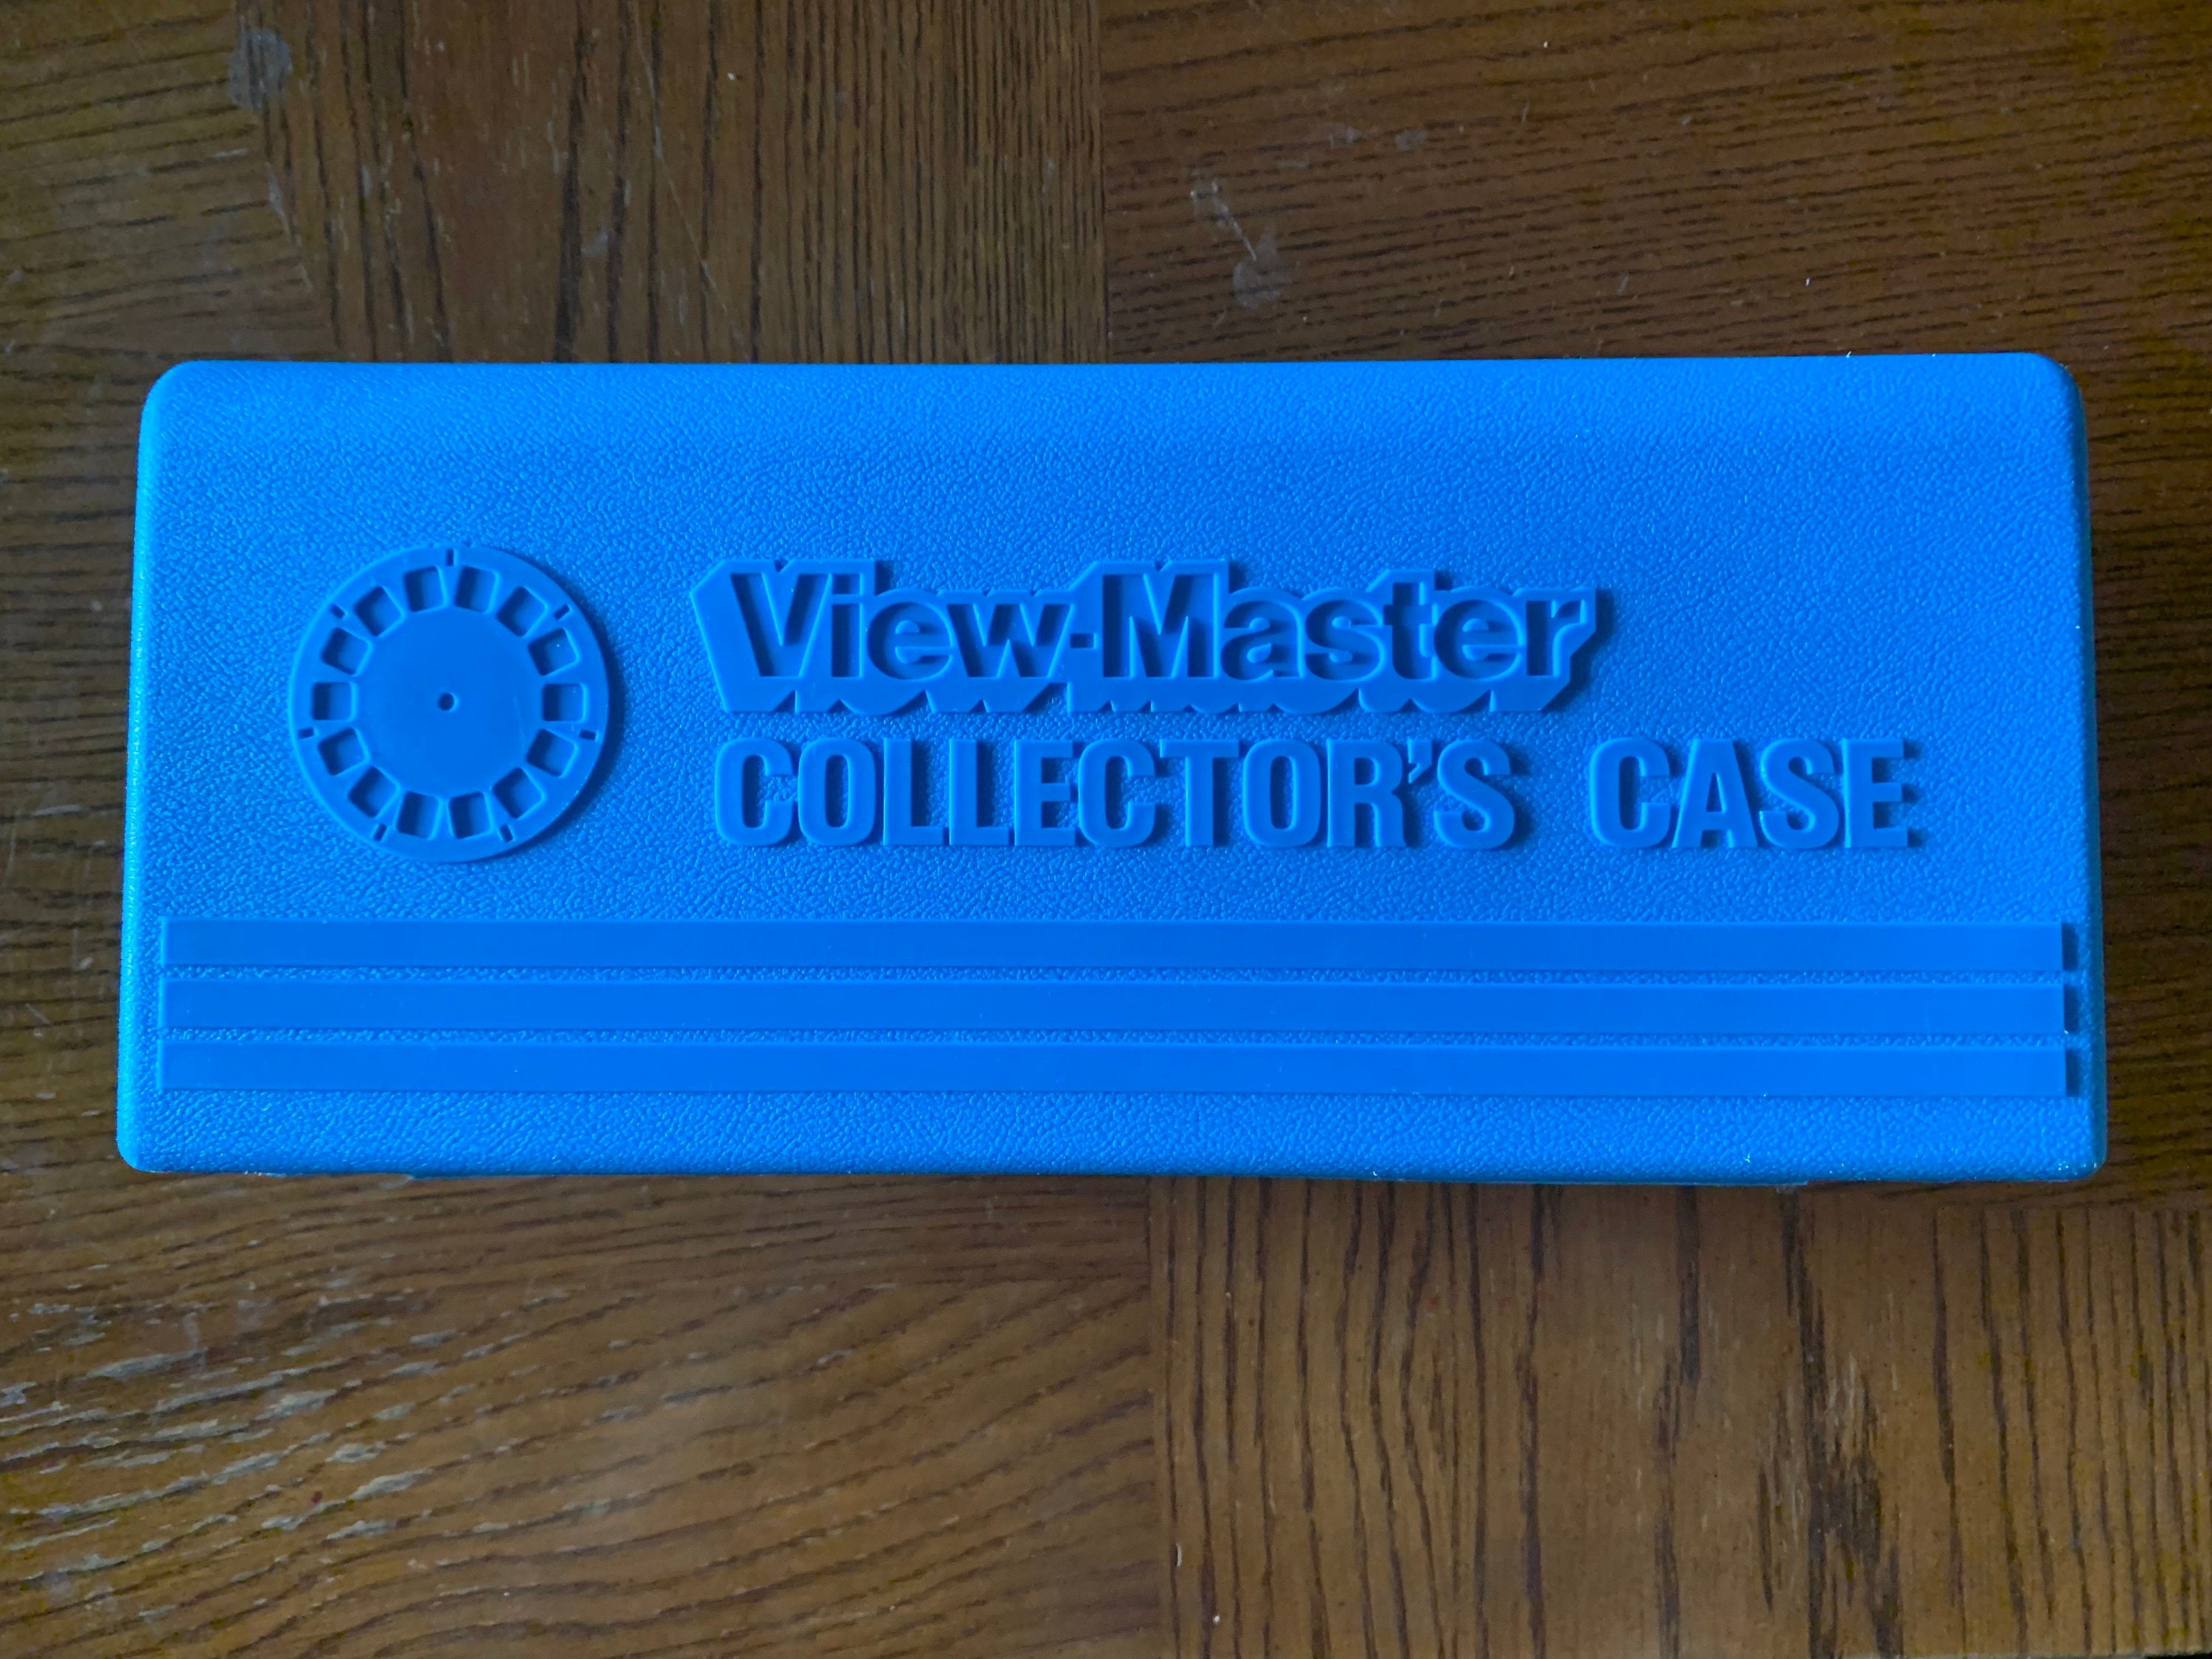 The Master Collector of View-Master